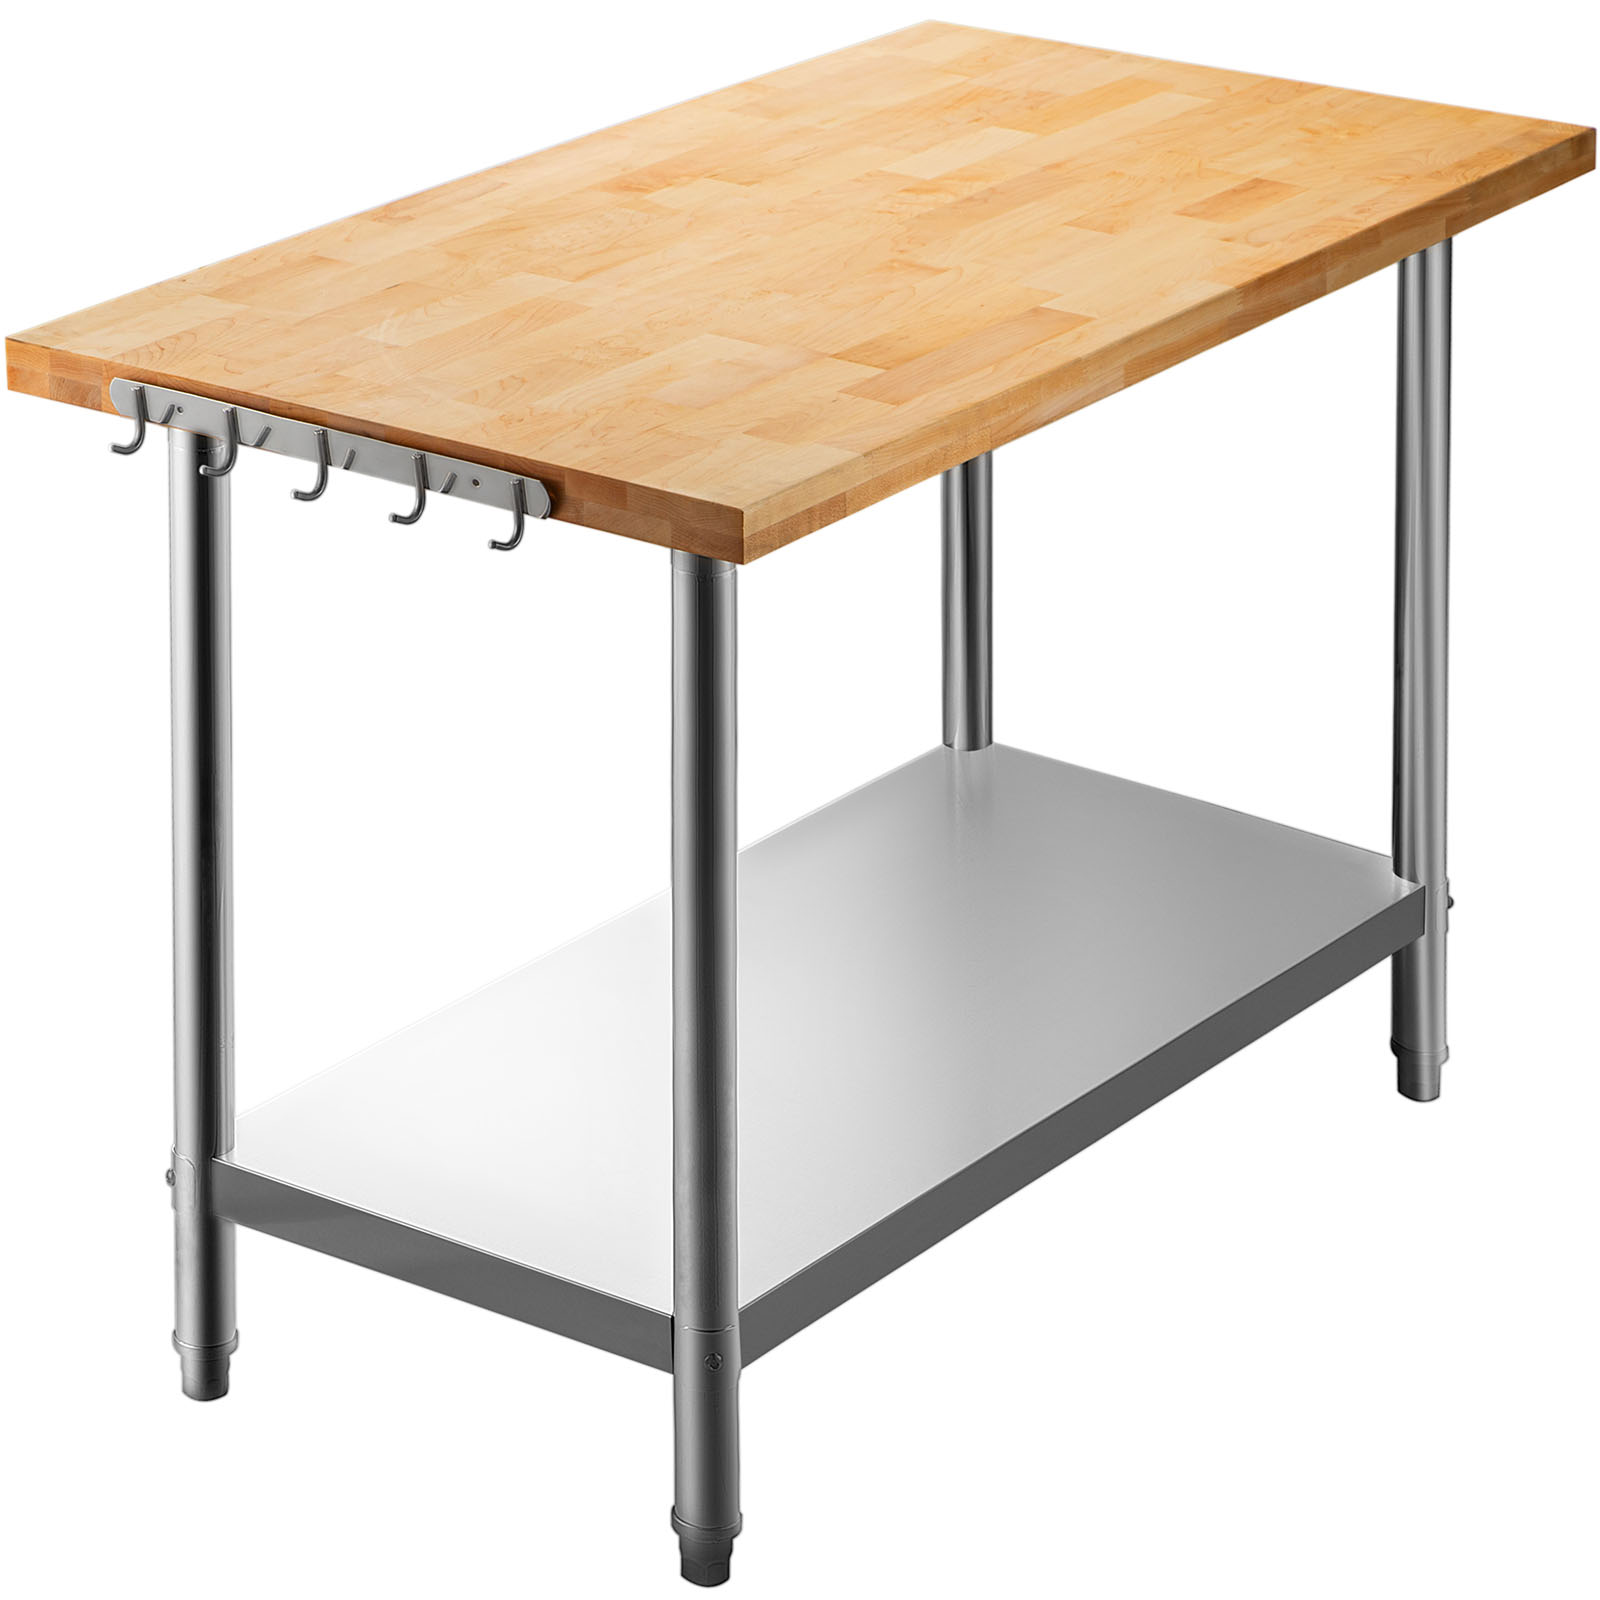 Vevor Maple Top Work Table Kitchen Prep Table Wood 48 X 24 In Stainless Steel от Vevor Many GEOs